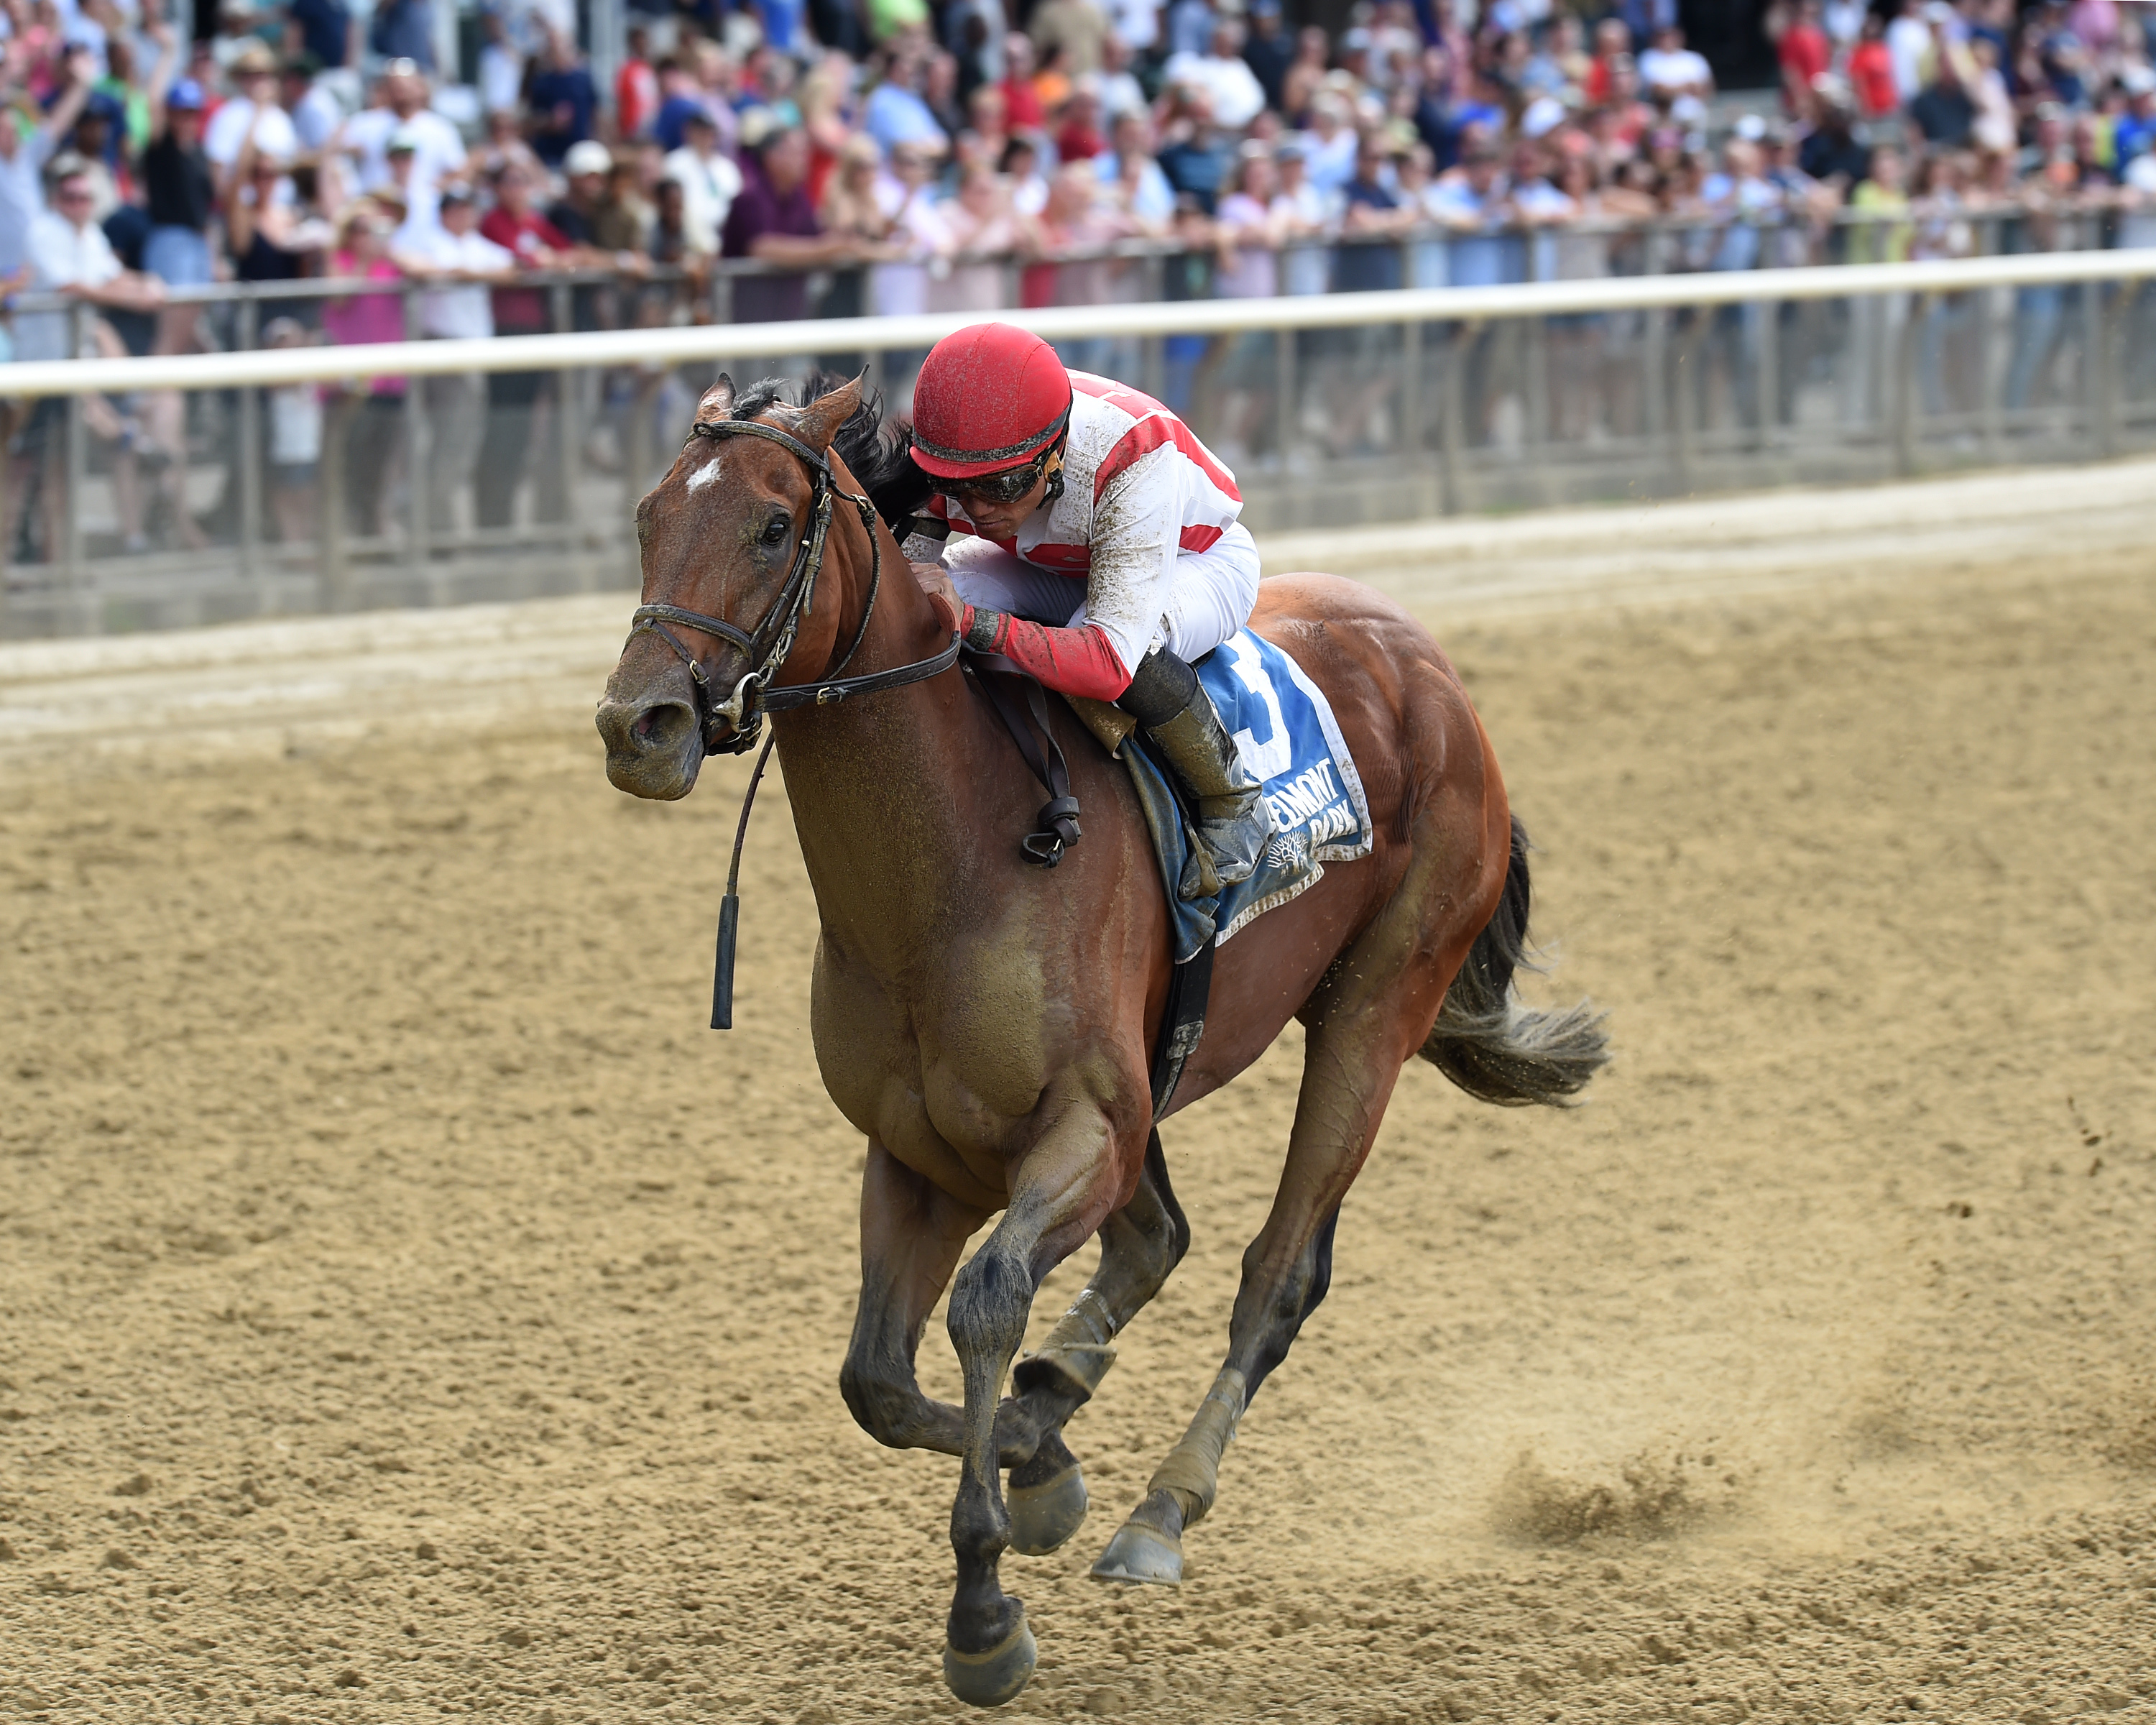 After a failed Kentucky Derby bid, Practical Joke proved he's no joke at shorter distances by winning the Grade III Dwyer in impressive fashion (photo via Chelsea Durand/NYRA).